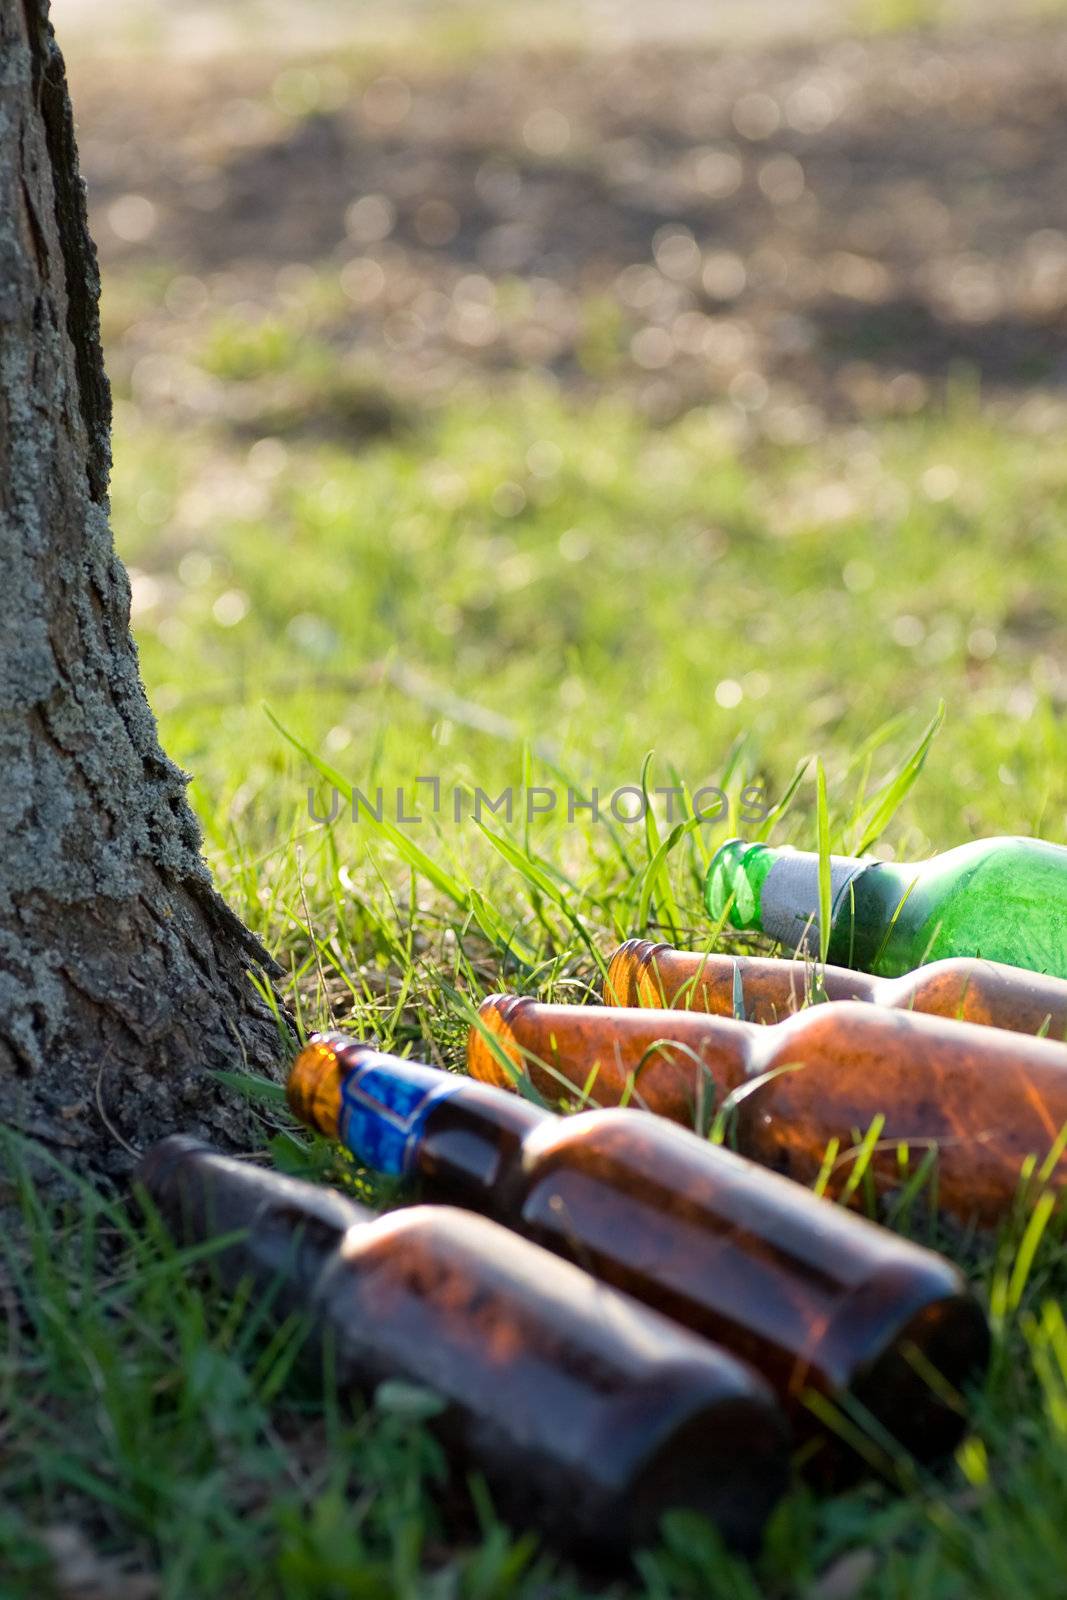 A lineup of beer bottles left on the grass, up against a tree.